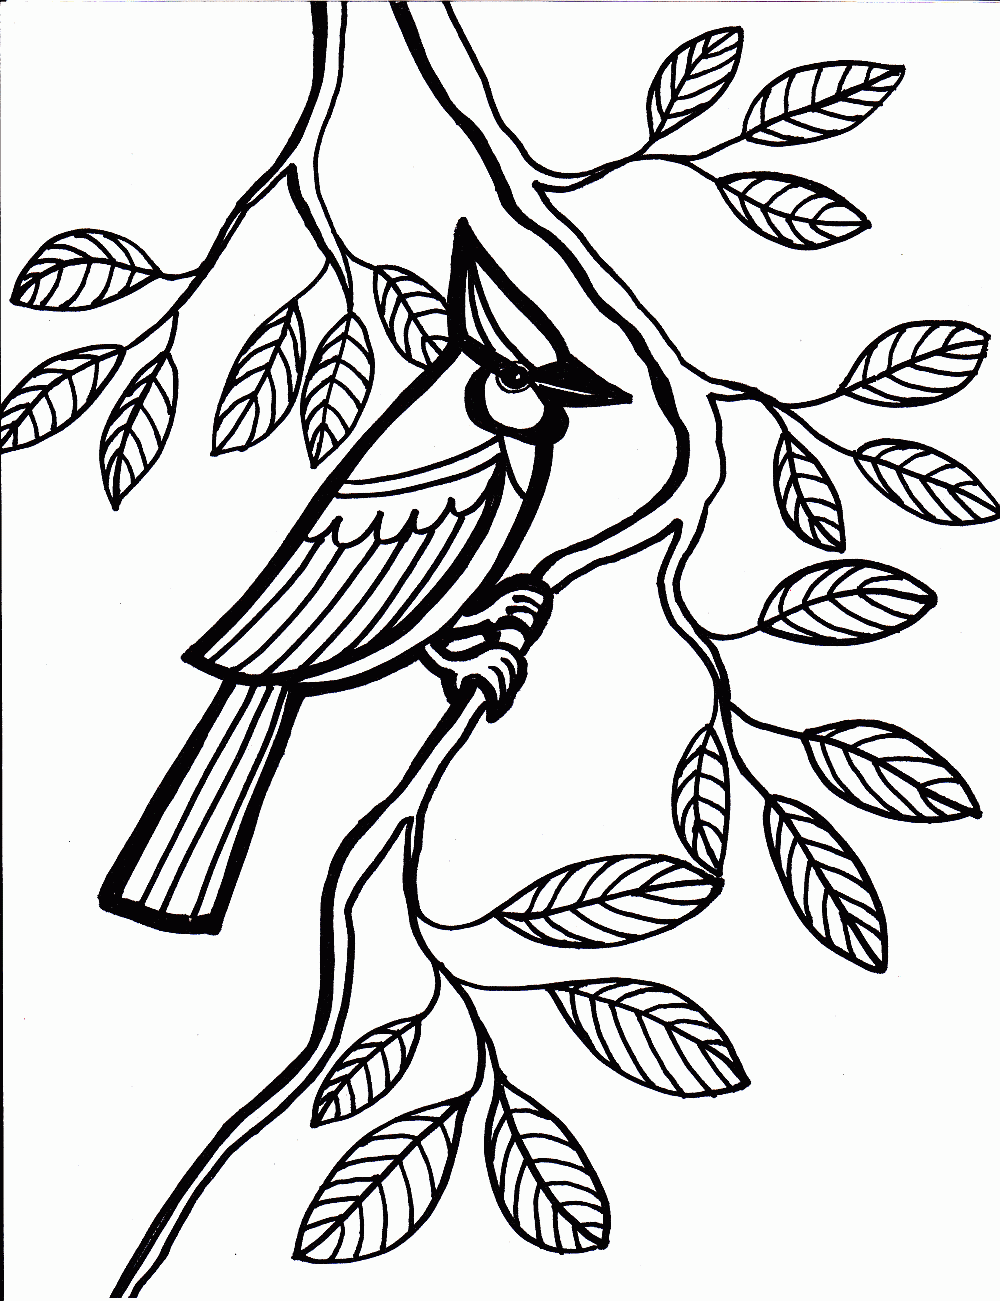 Printable Bird Coloring Pages